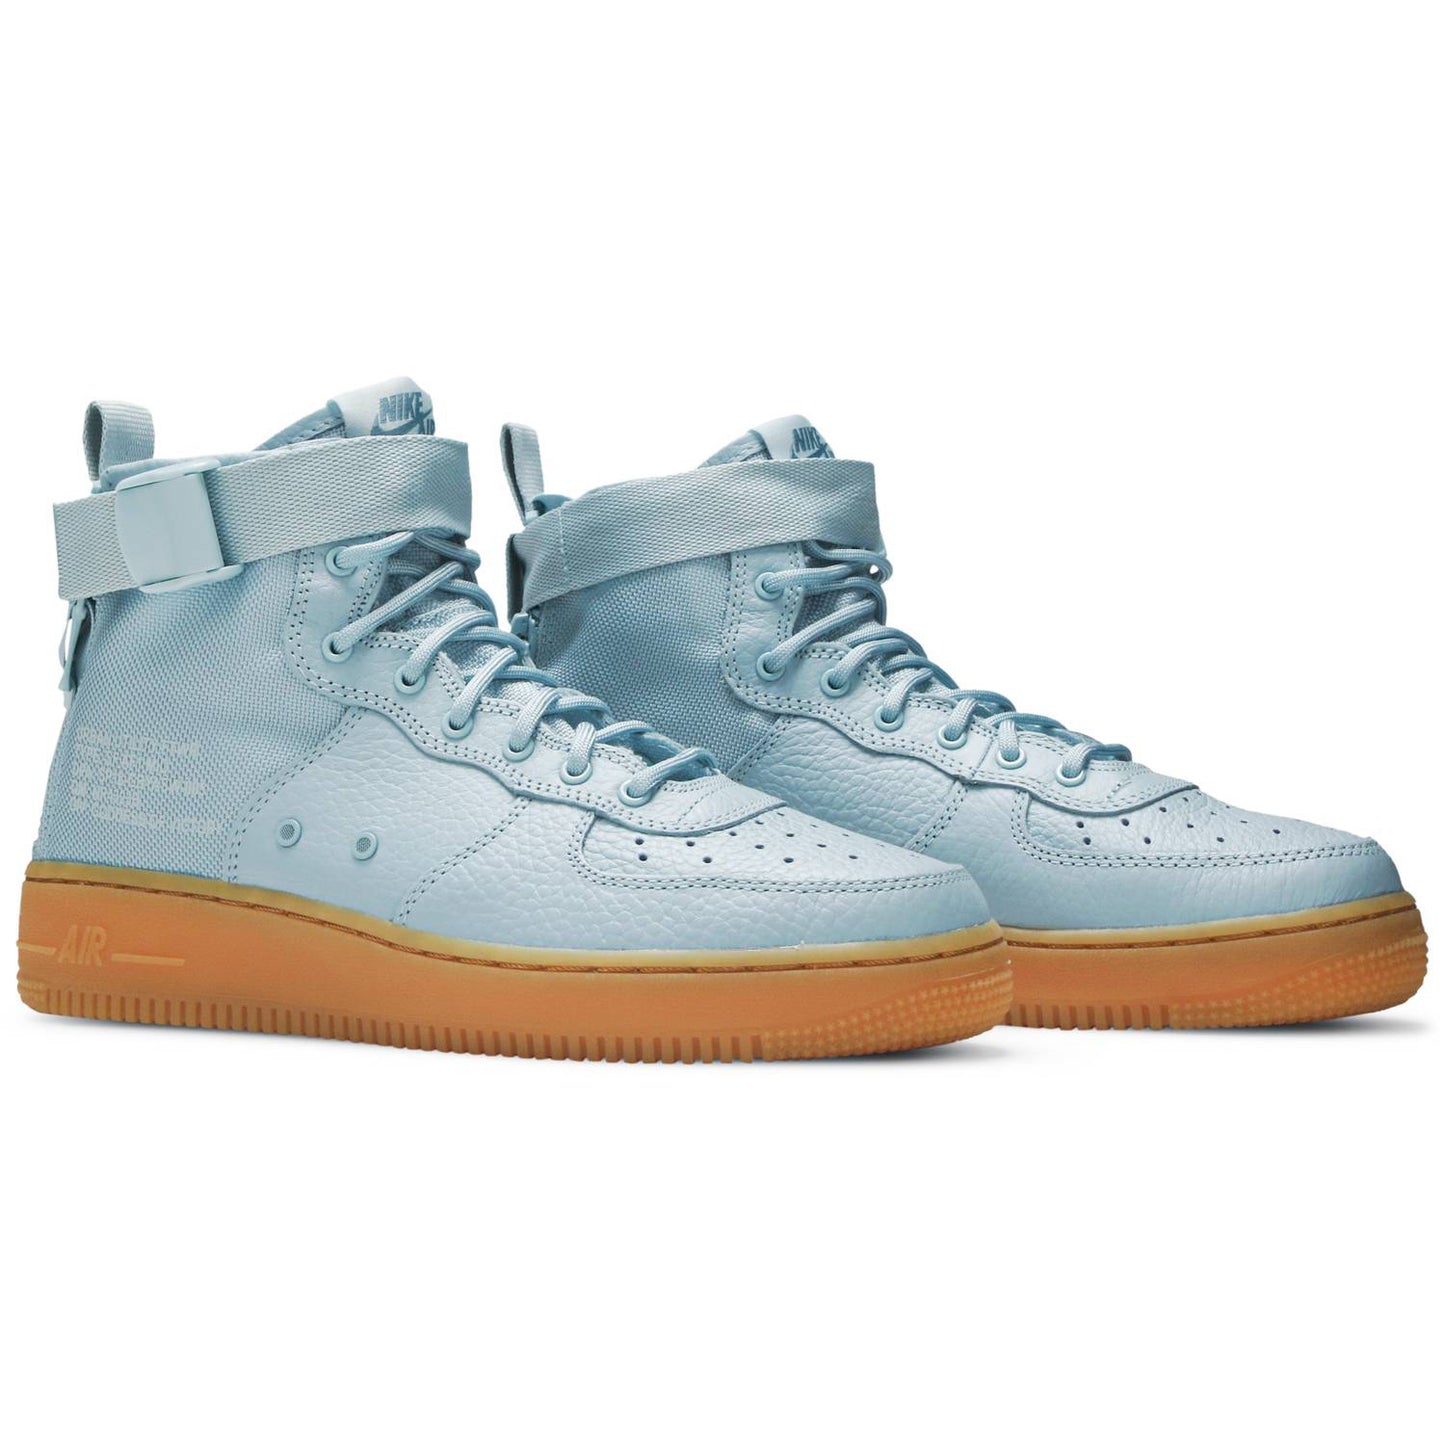 Nike SF Air Force 1 Mid Celestial Teal AT5042 400